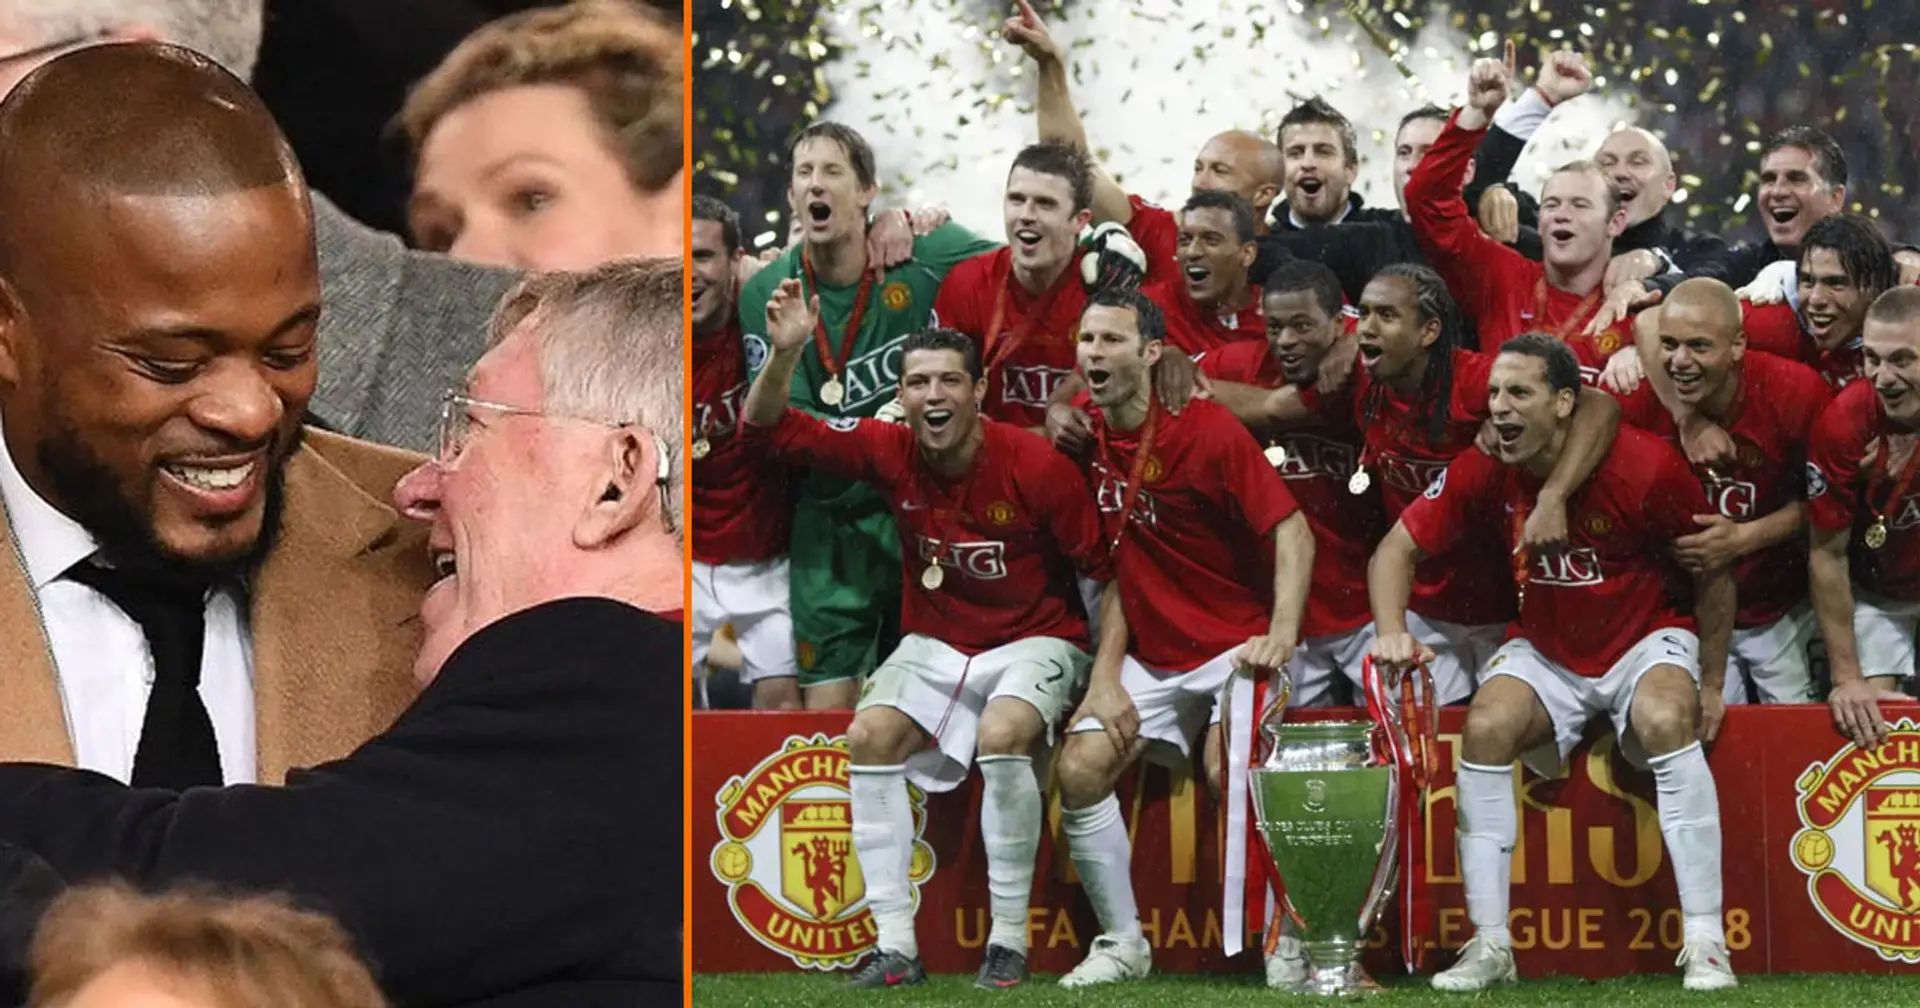 Evra recalls Sir Alex's 2008 UCL final team talk — it gives goosebumps even after 15 years